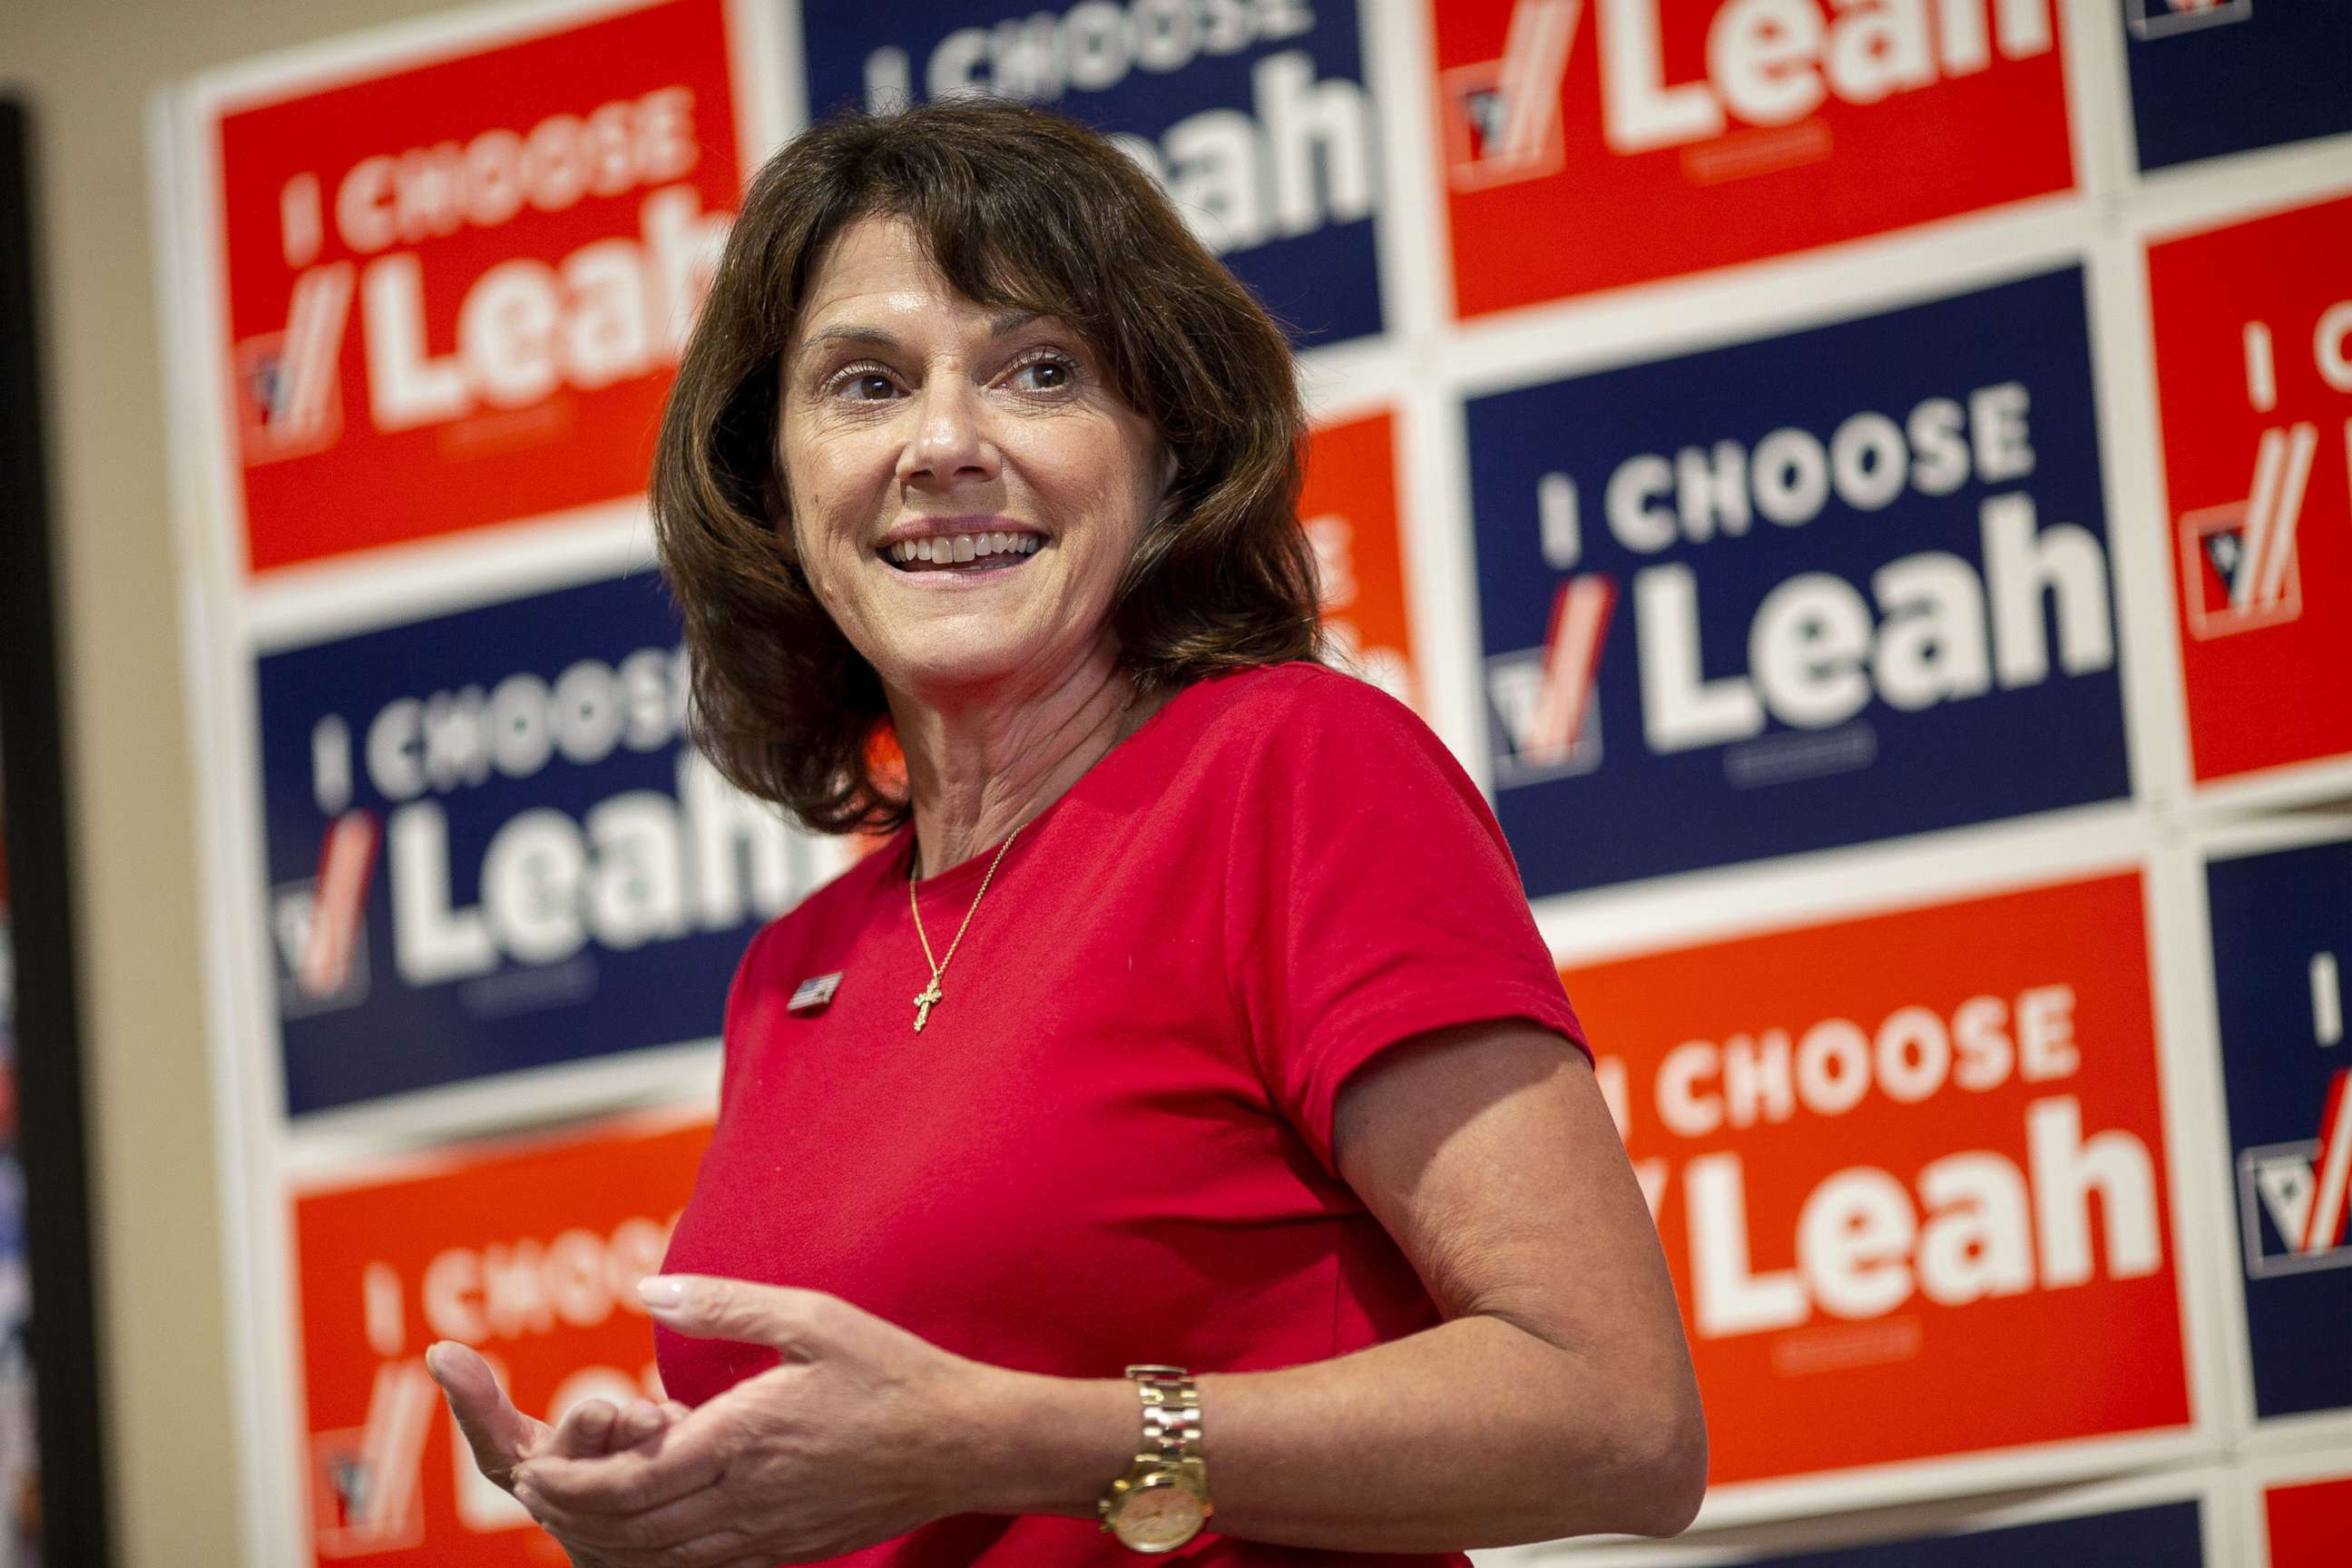 PHOTO: Leah Vukmir, a Republican Senate candidate from Wisconsin, speaks during a campaign stop in Elkhorn, Wisconsin, Aug. 13, 2018.